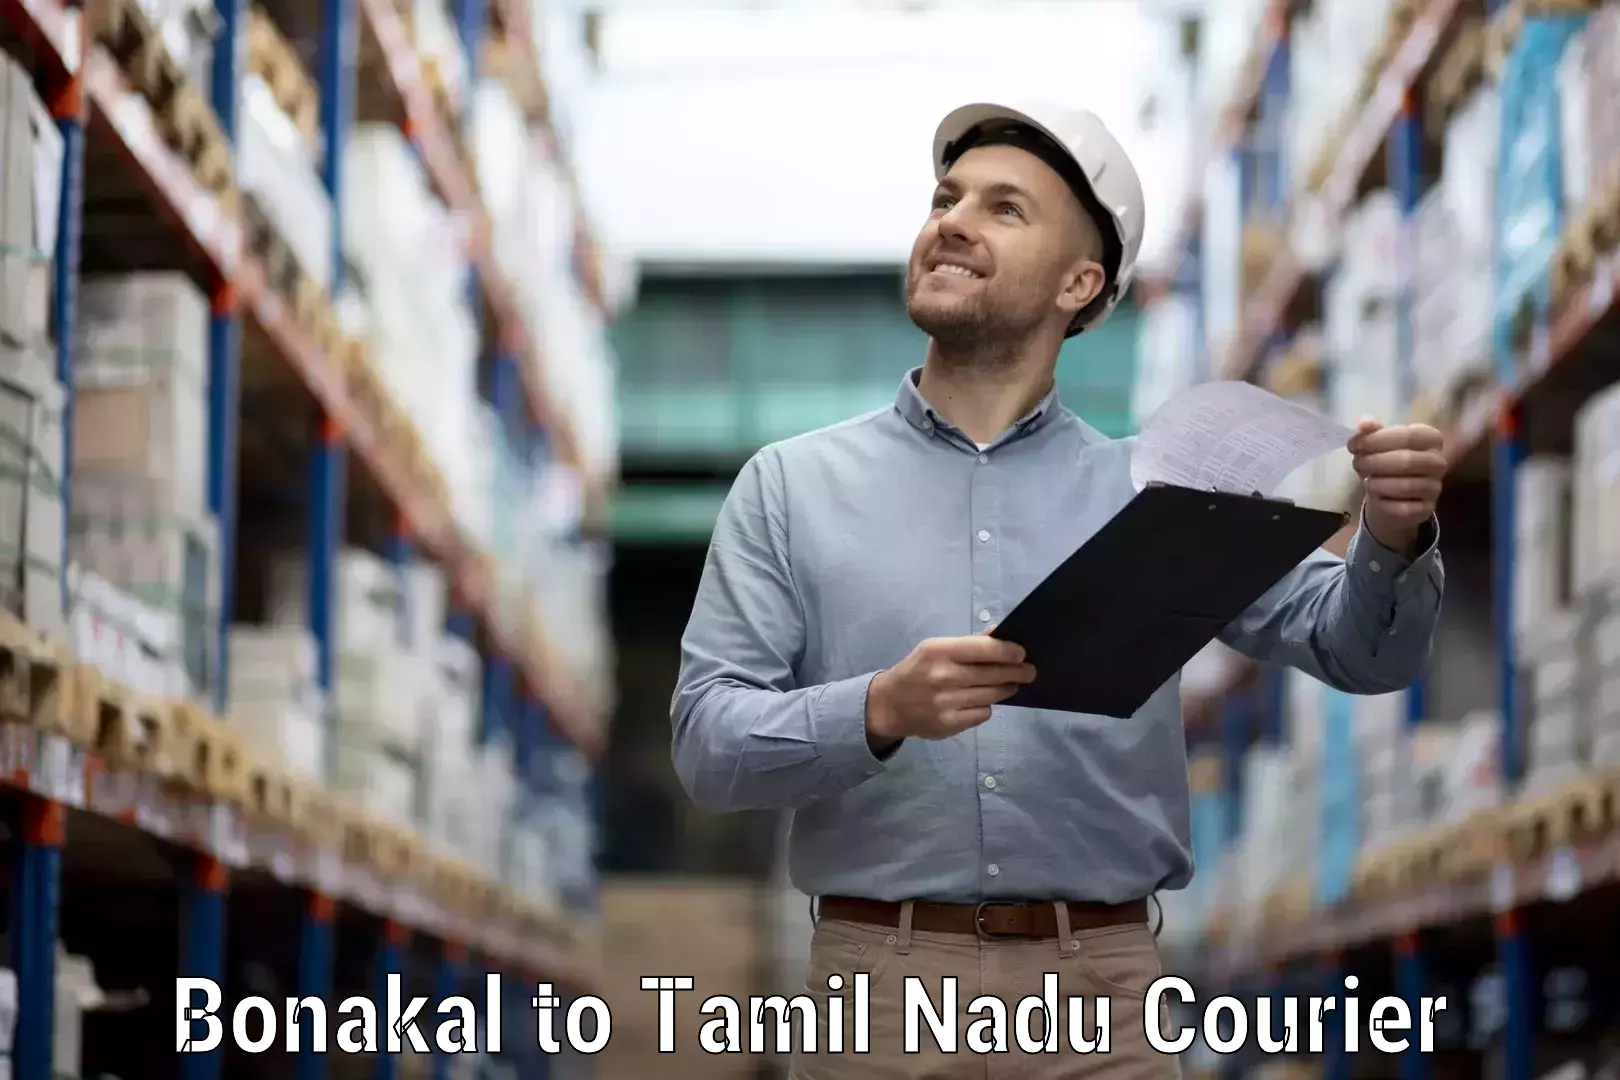 Courier service innovation Bonakal to Tamil Nadu Agricultural University Coimbatore